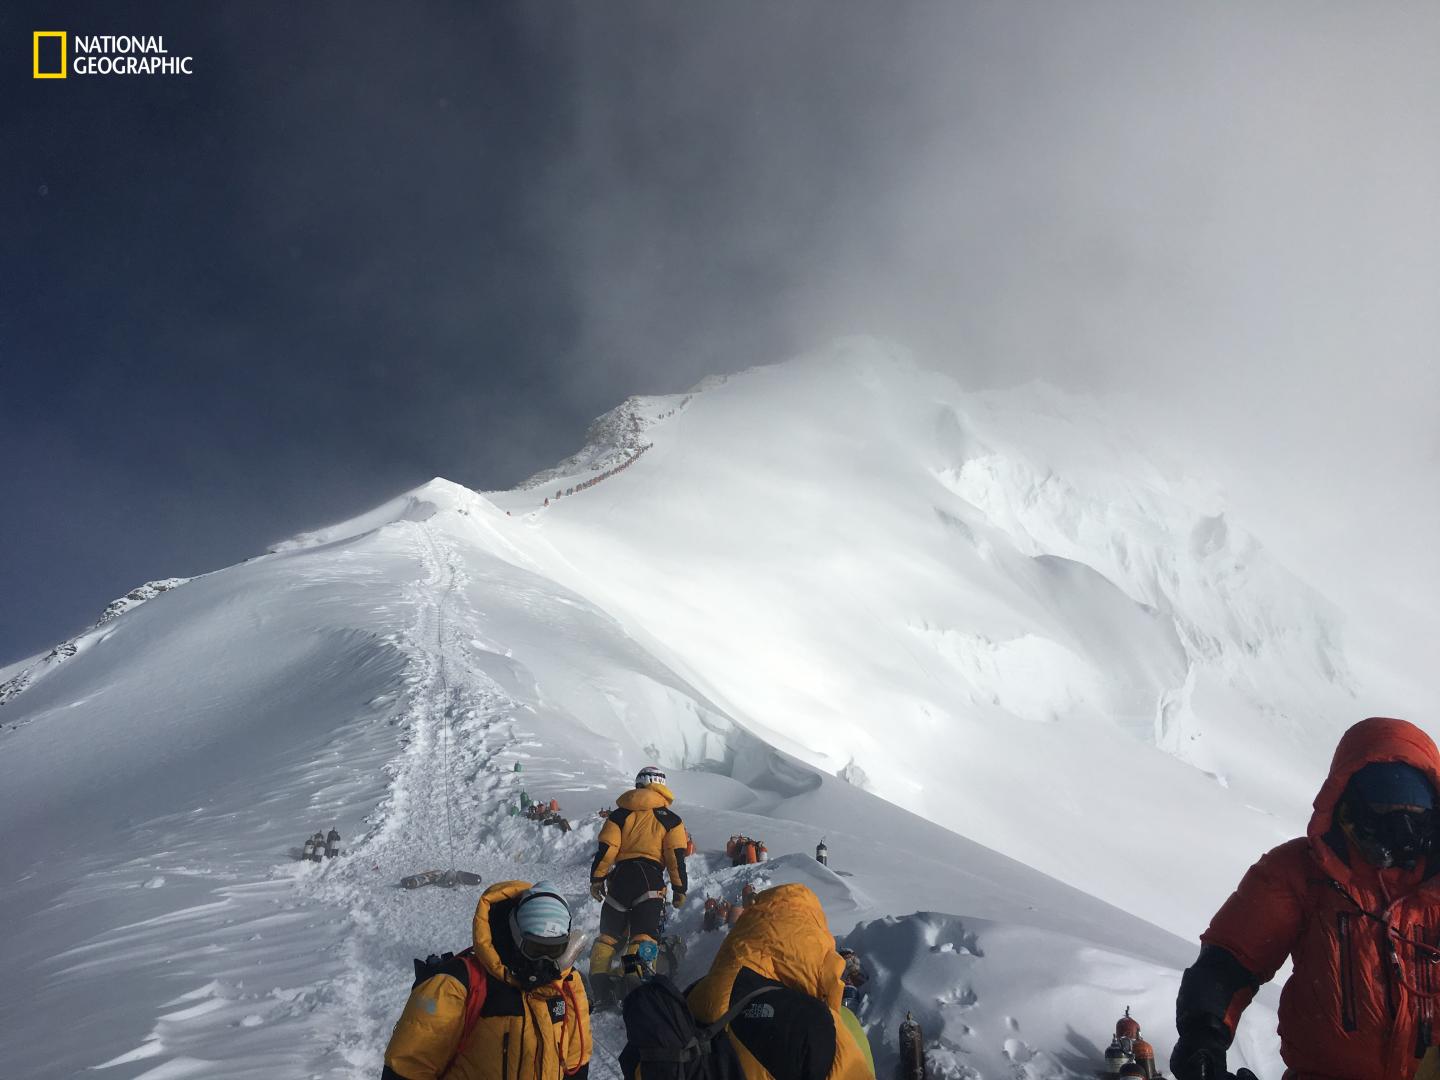 Searching for microplastics on Mount Everest